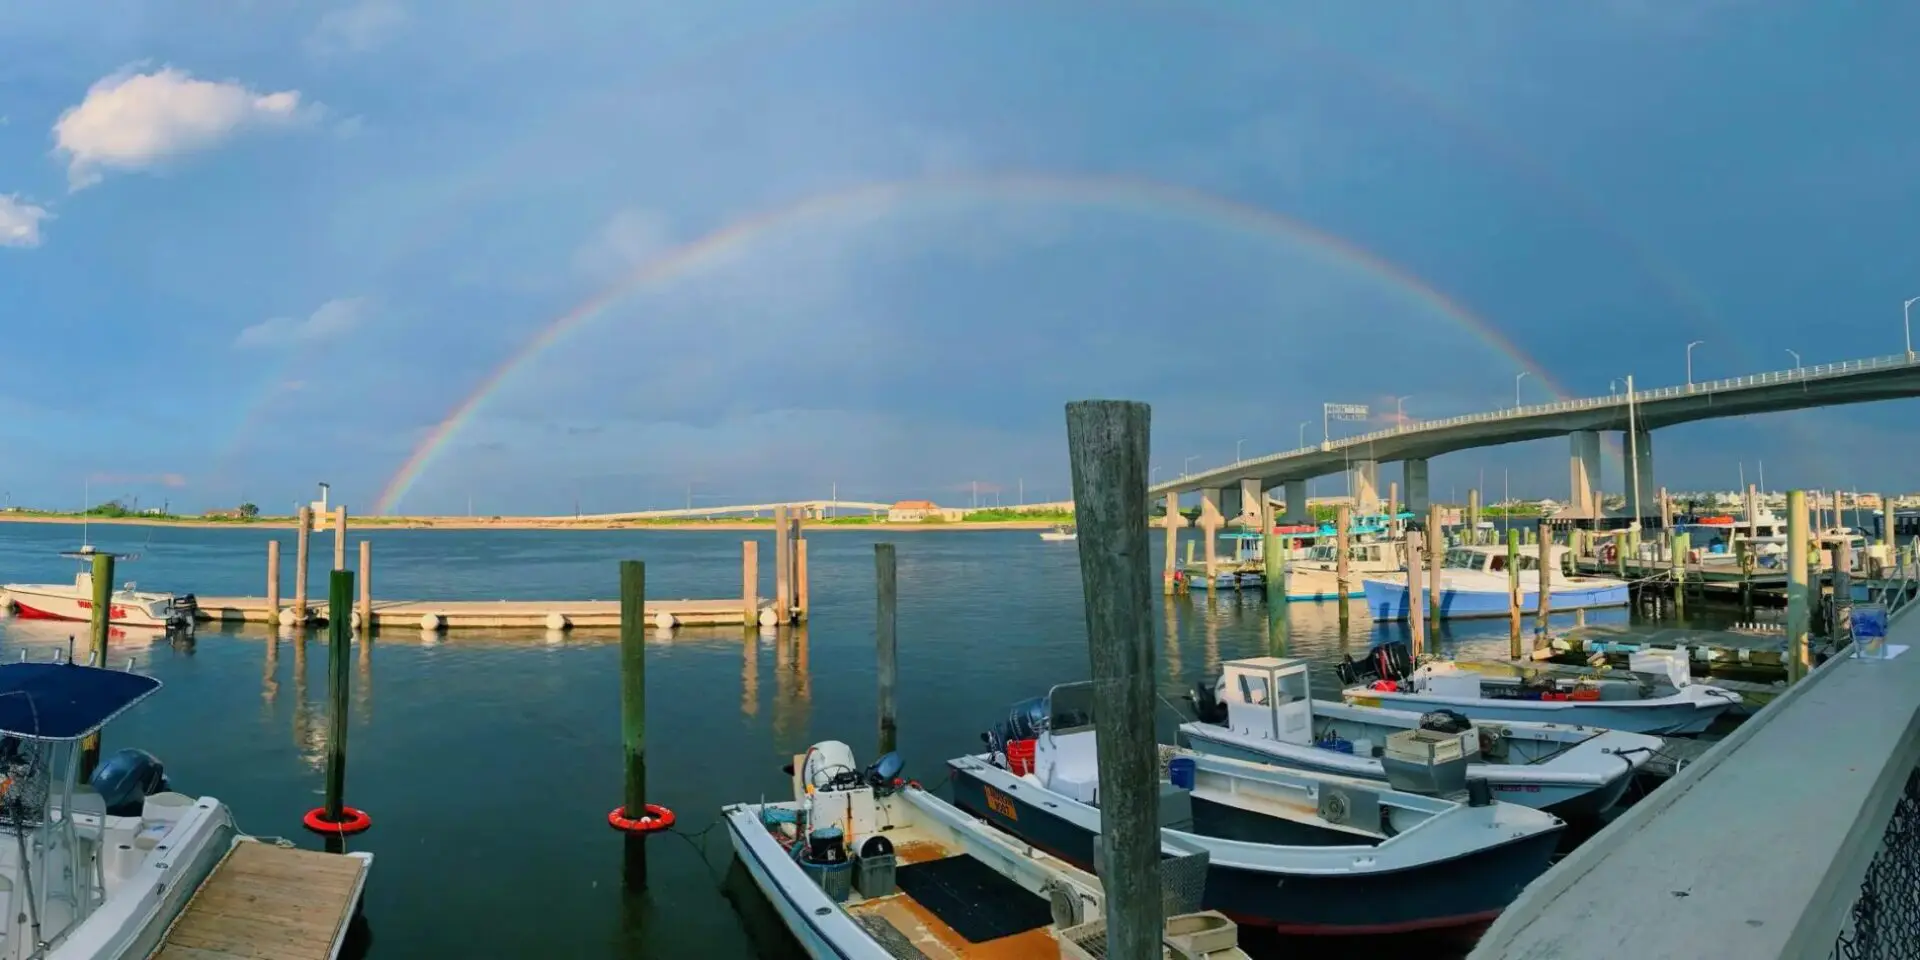 A rainbow over boats in the water.